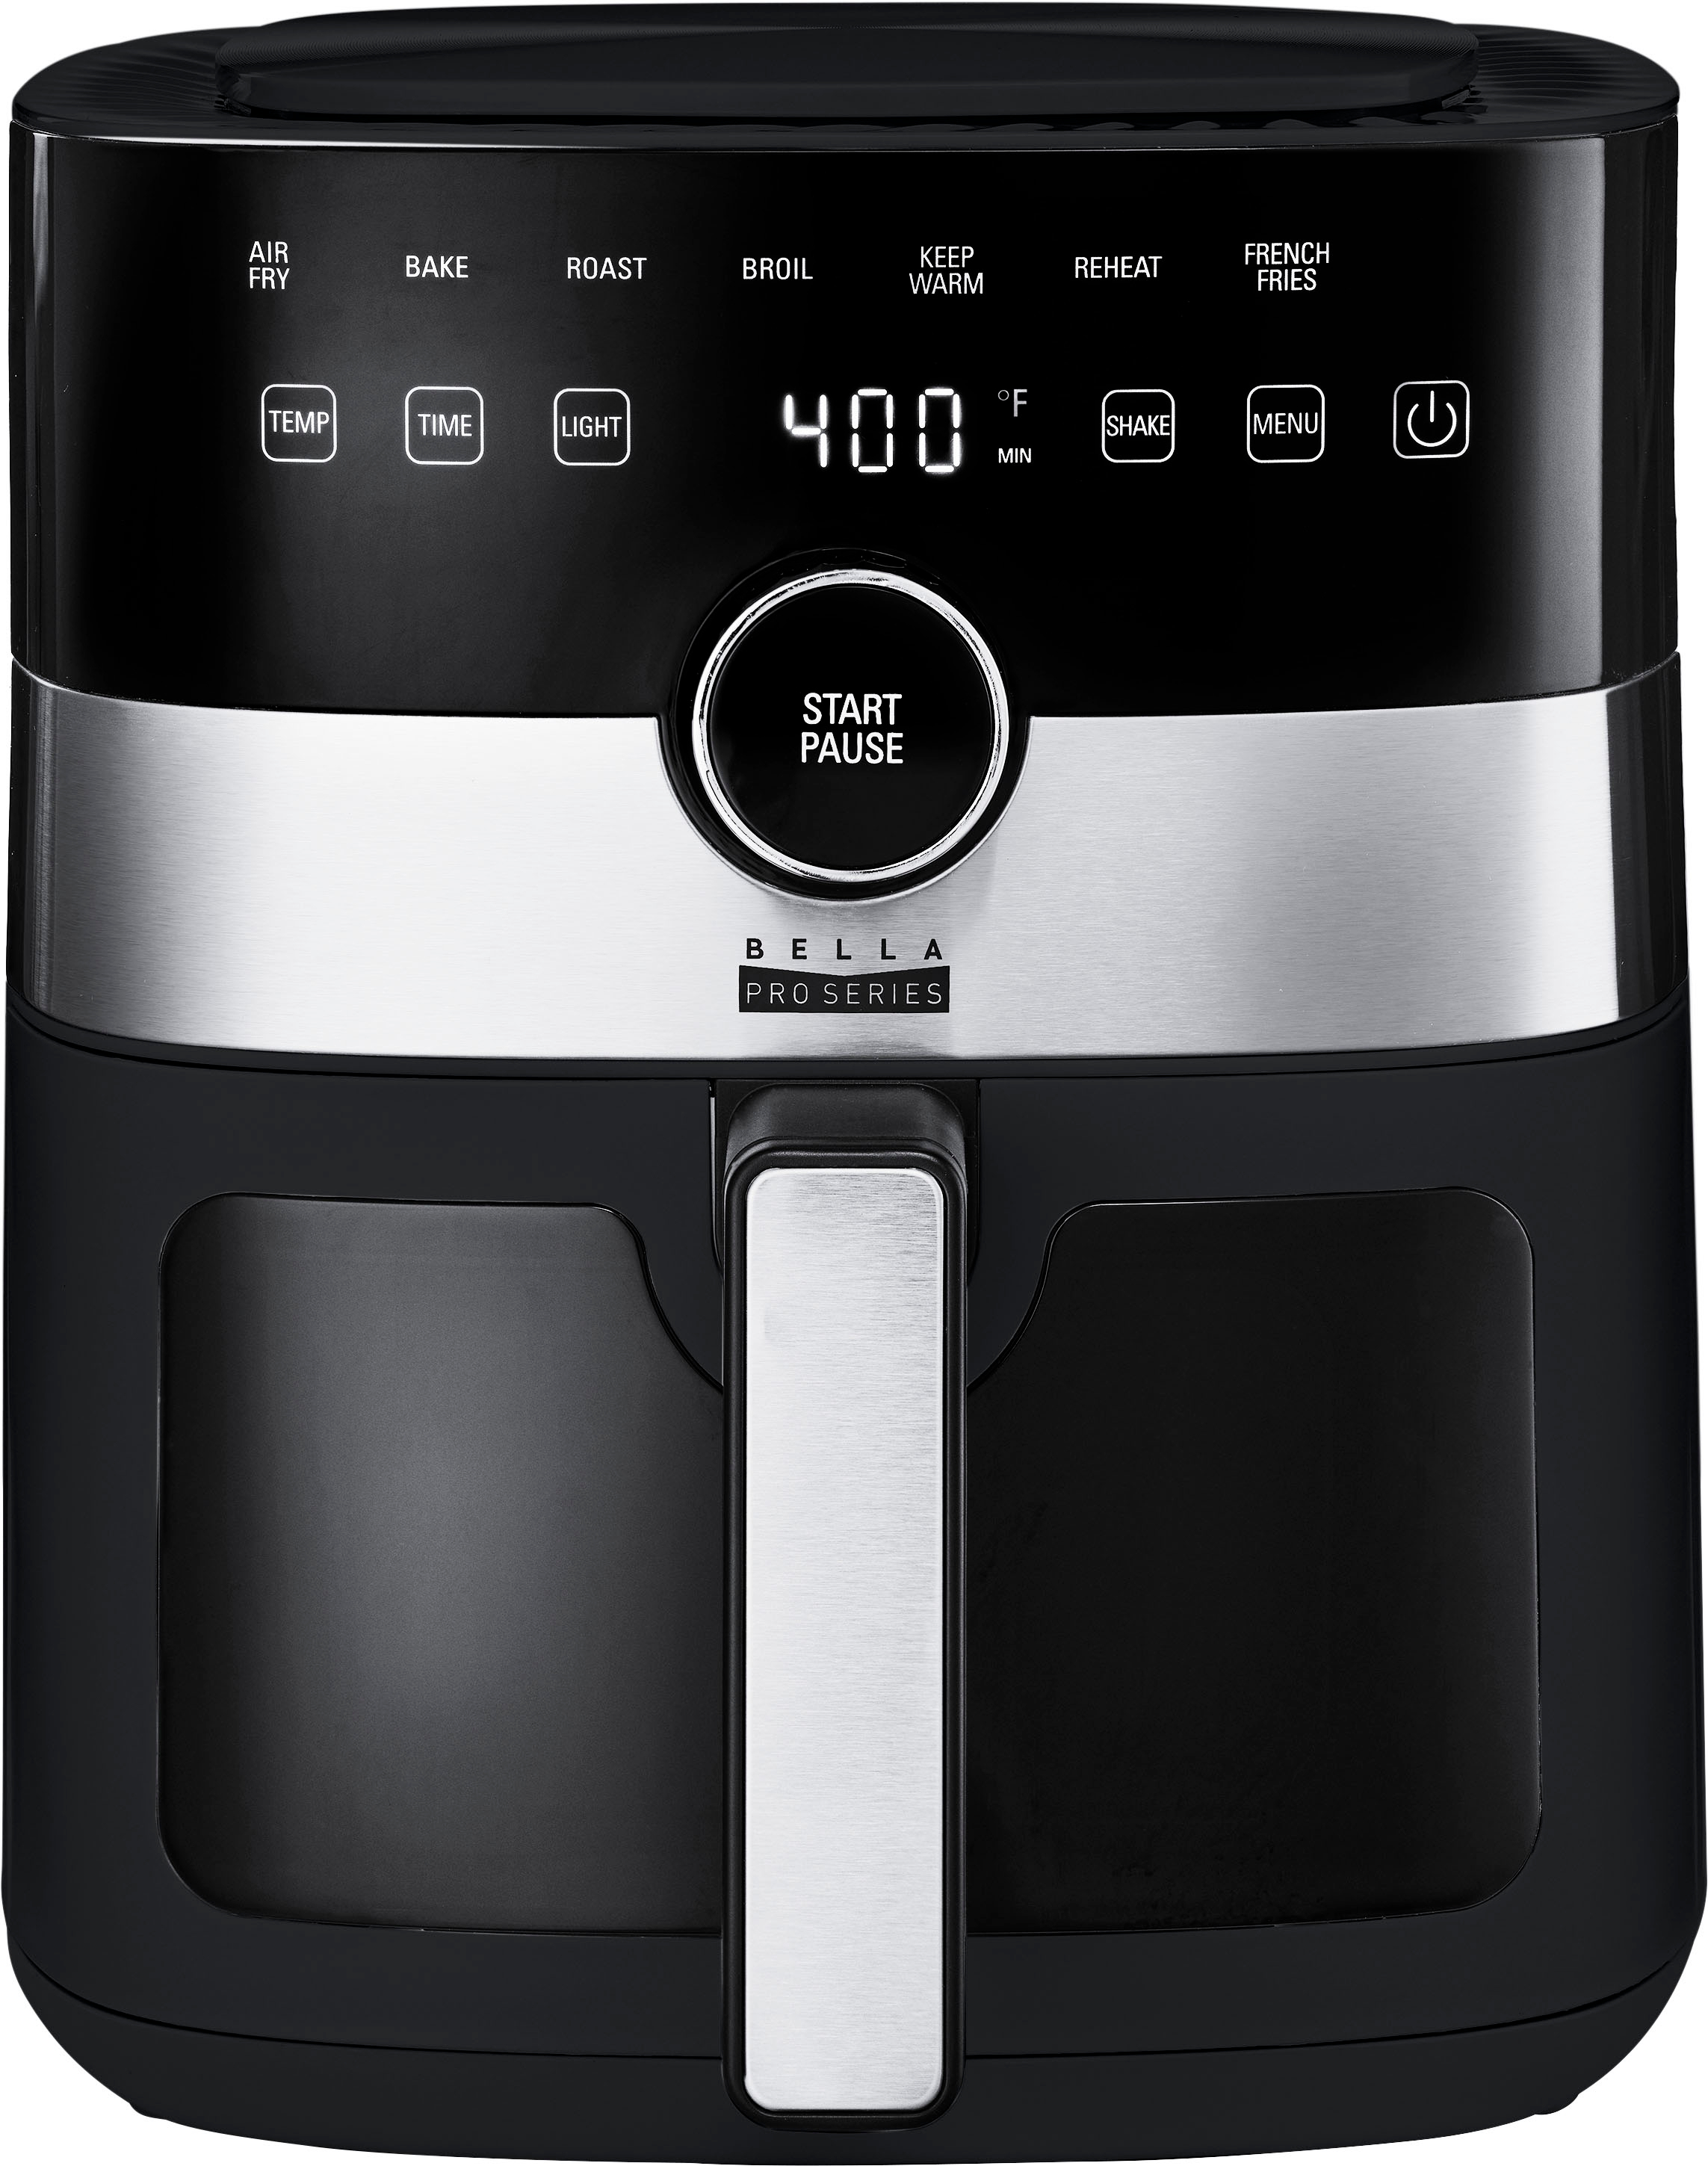  5 Qt Digital Air Fryer with Viewing Window, Black : Home &  Kitchen